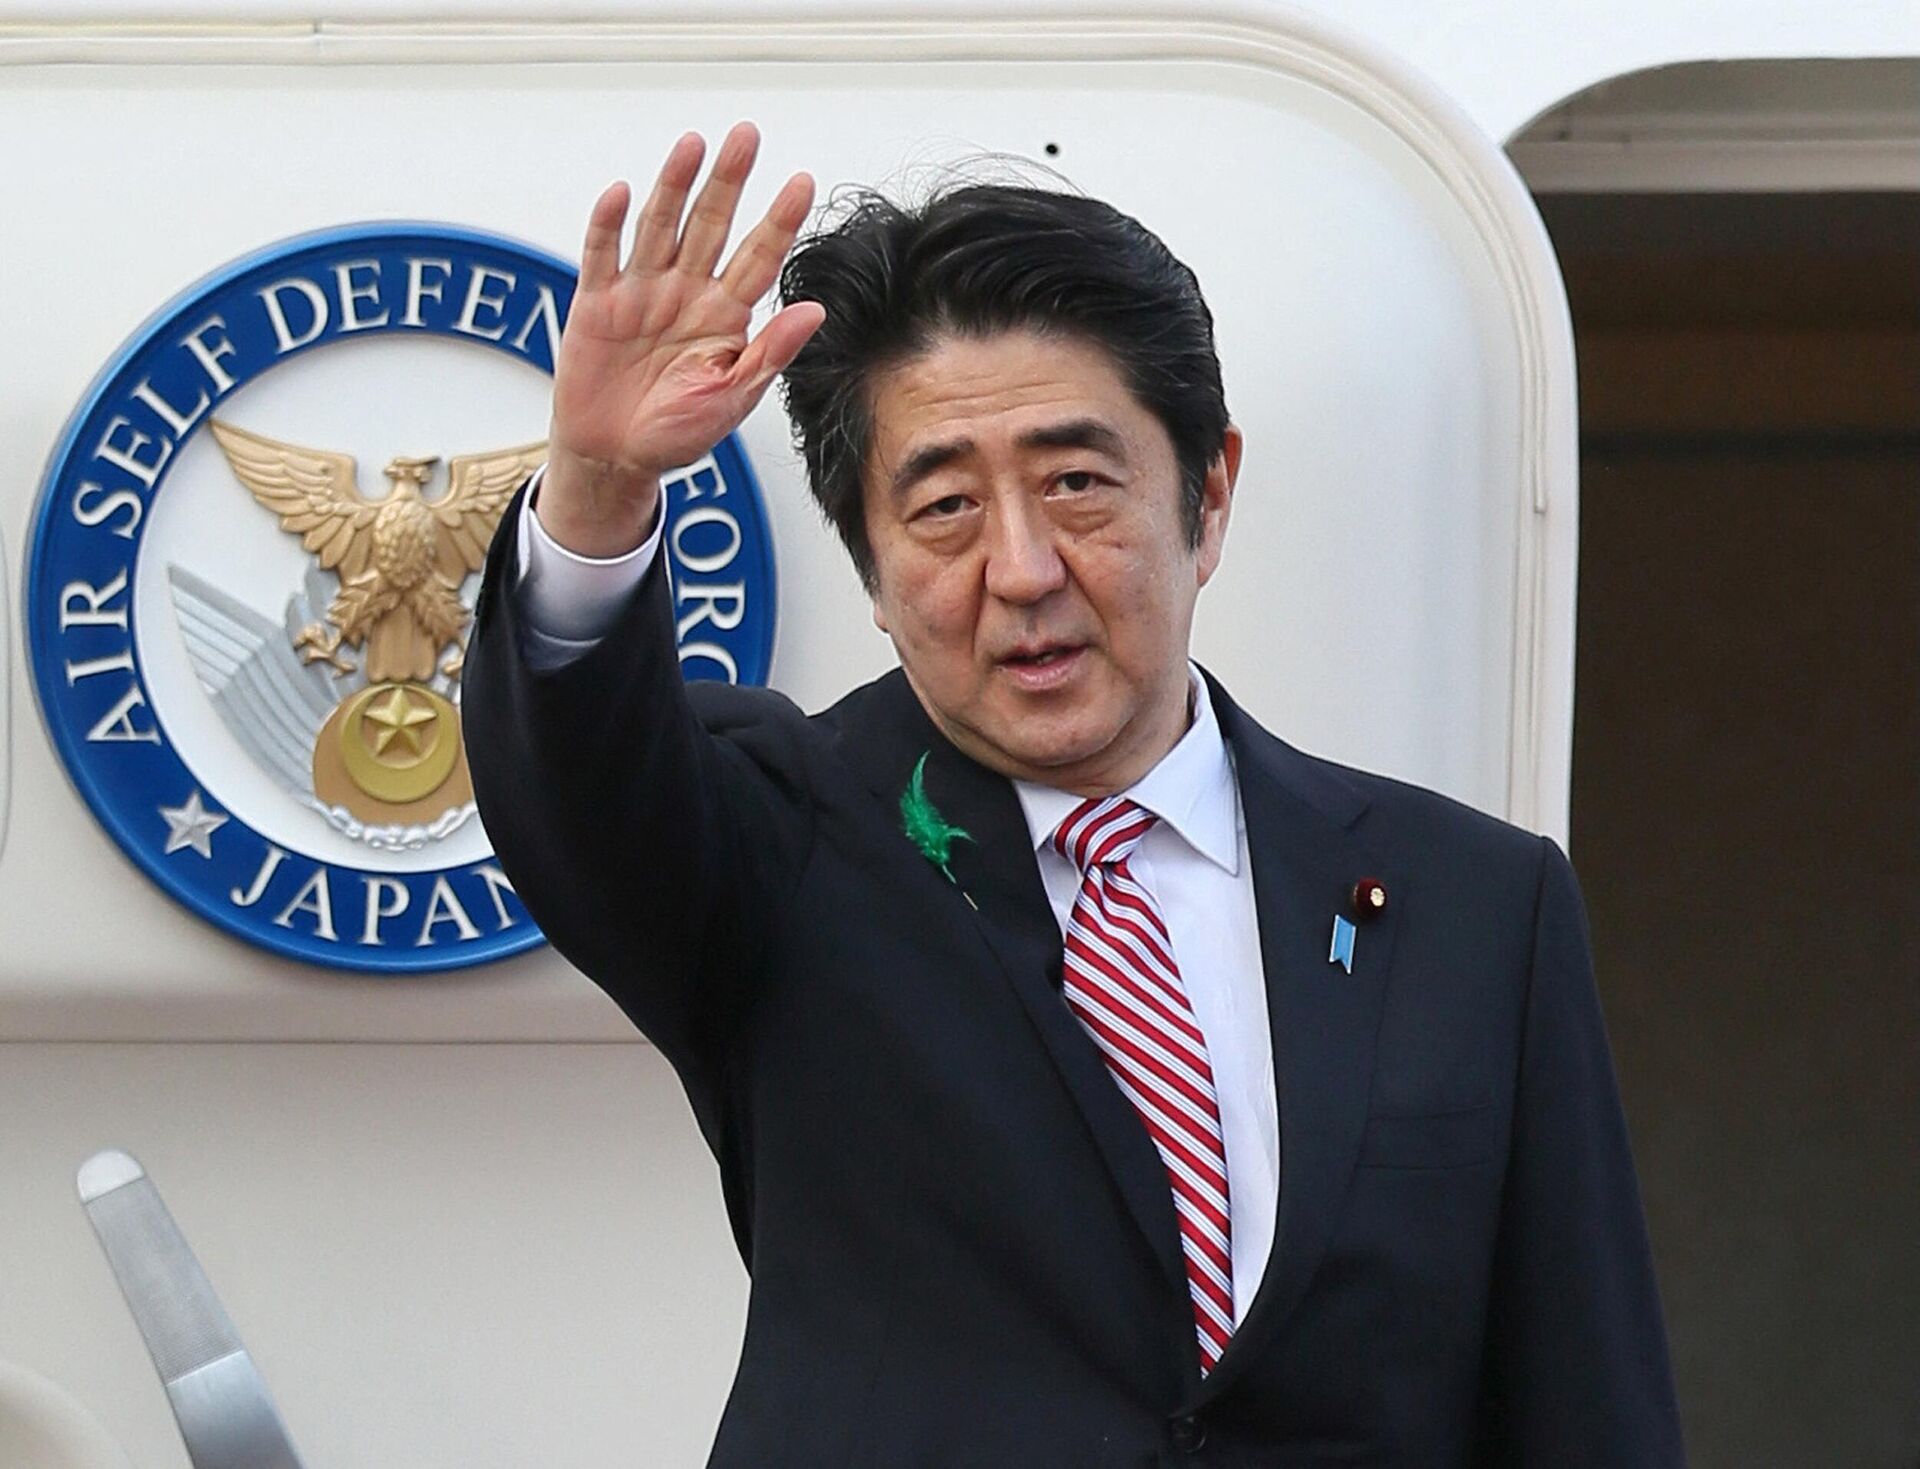  In this file photo taken on April 21, 2015 Japanese Prime Minister Shinzo Abe waves as he leaves to Indonesia at the Tokyo International Airport in Tokyo. - Sputnik International, 1920, 10.07.2022